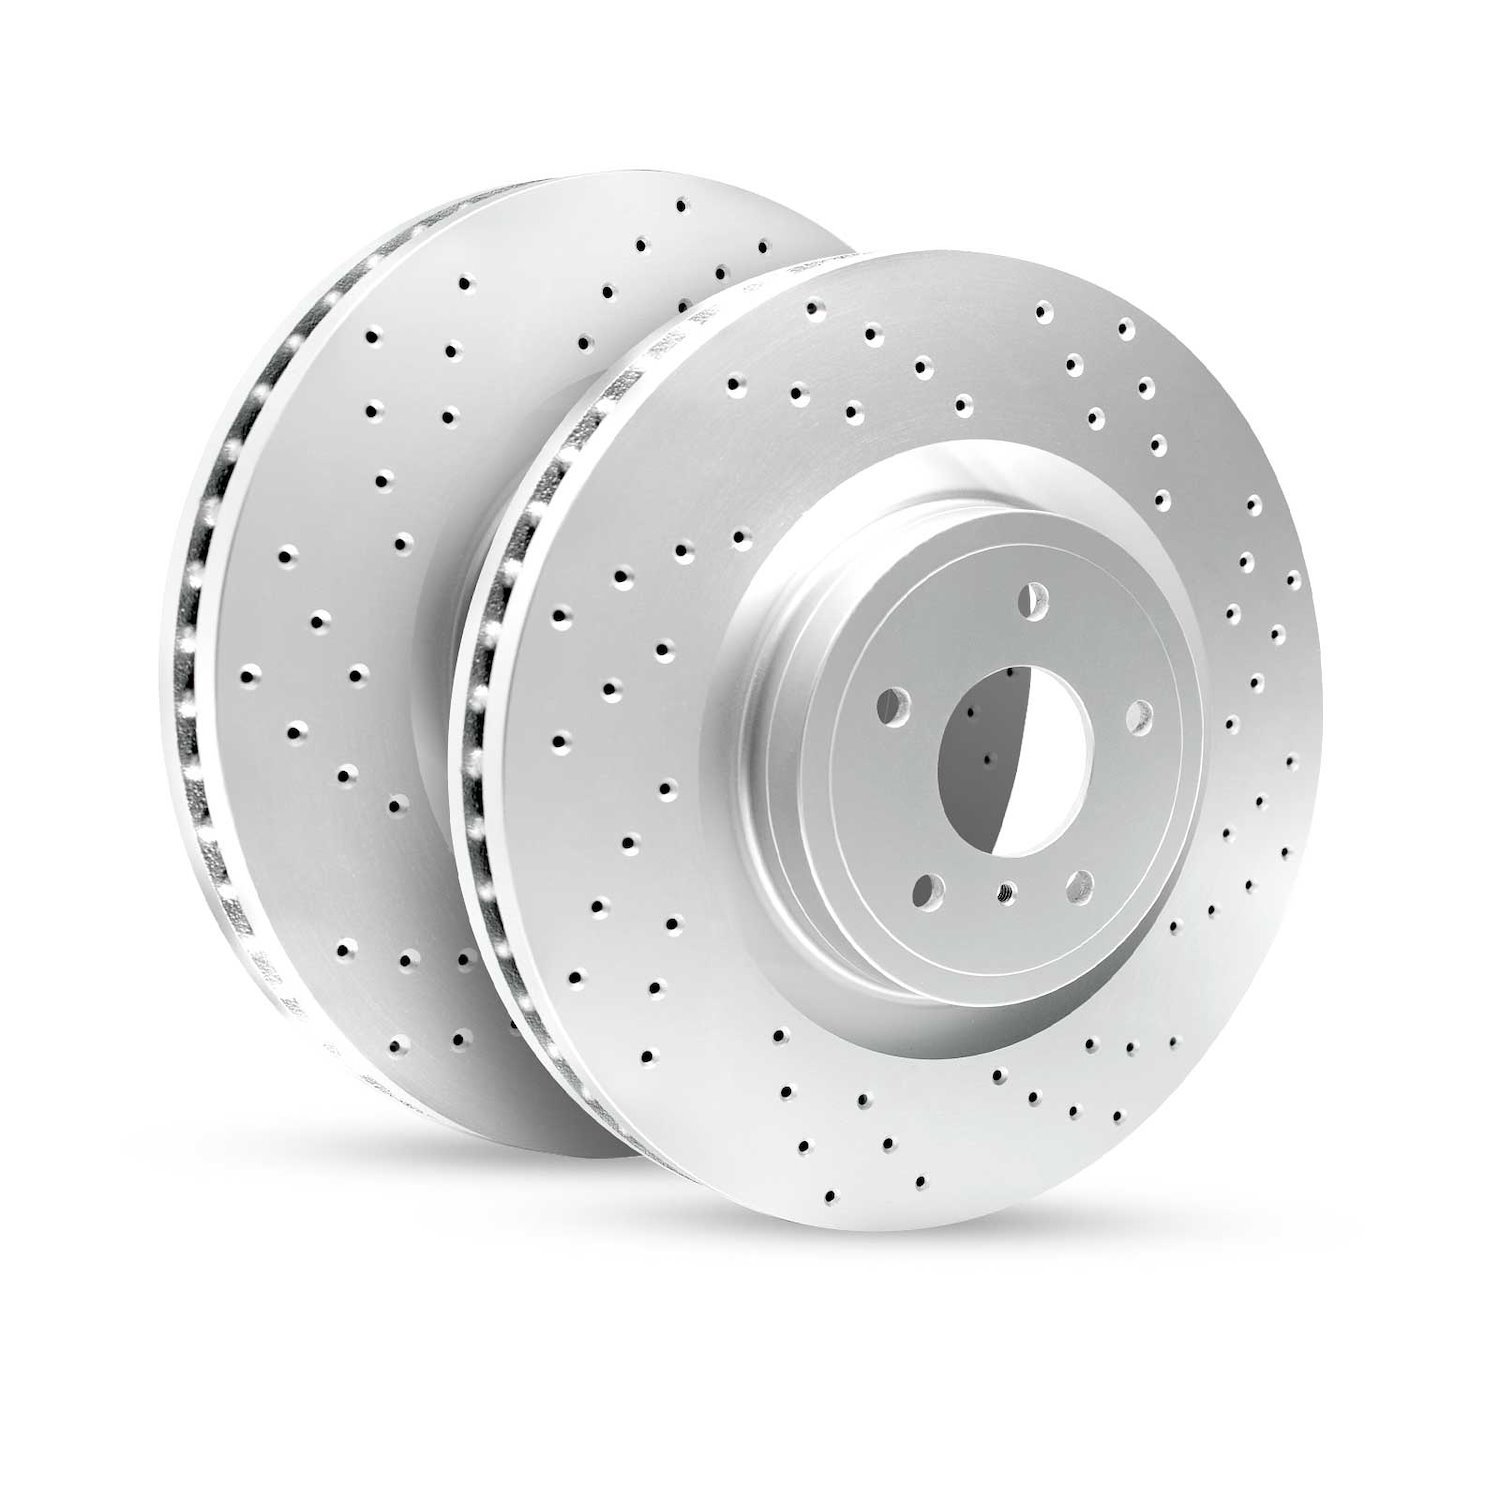 GEO-Carbon Drilled/Slotted Rotors, 2005-2010 Acura/Honda,